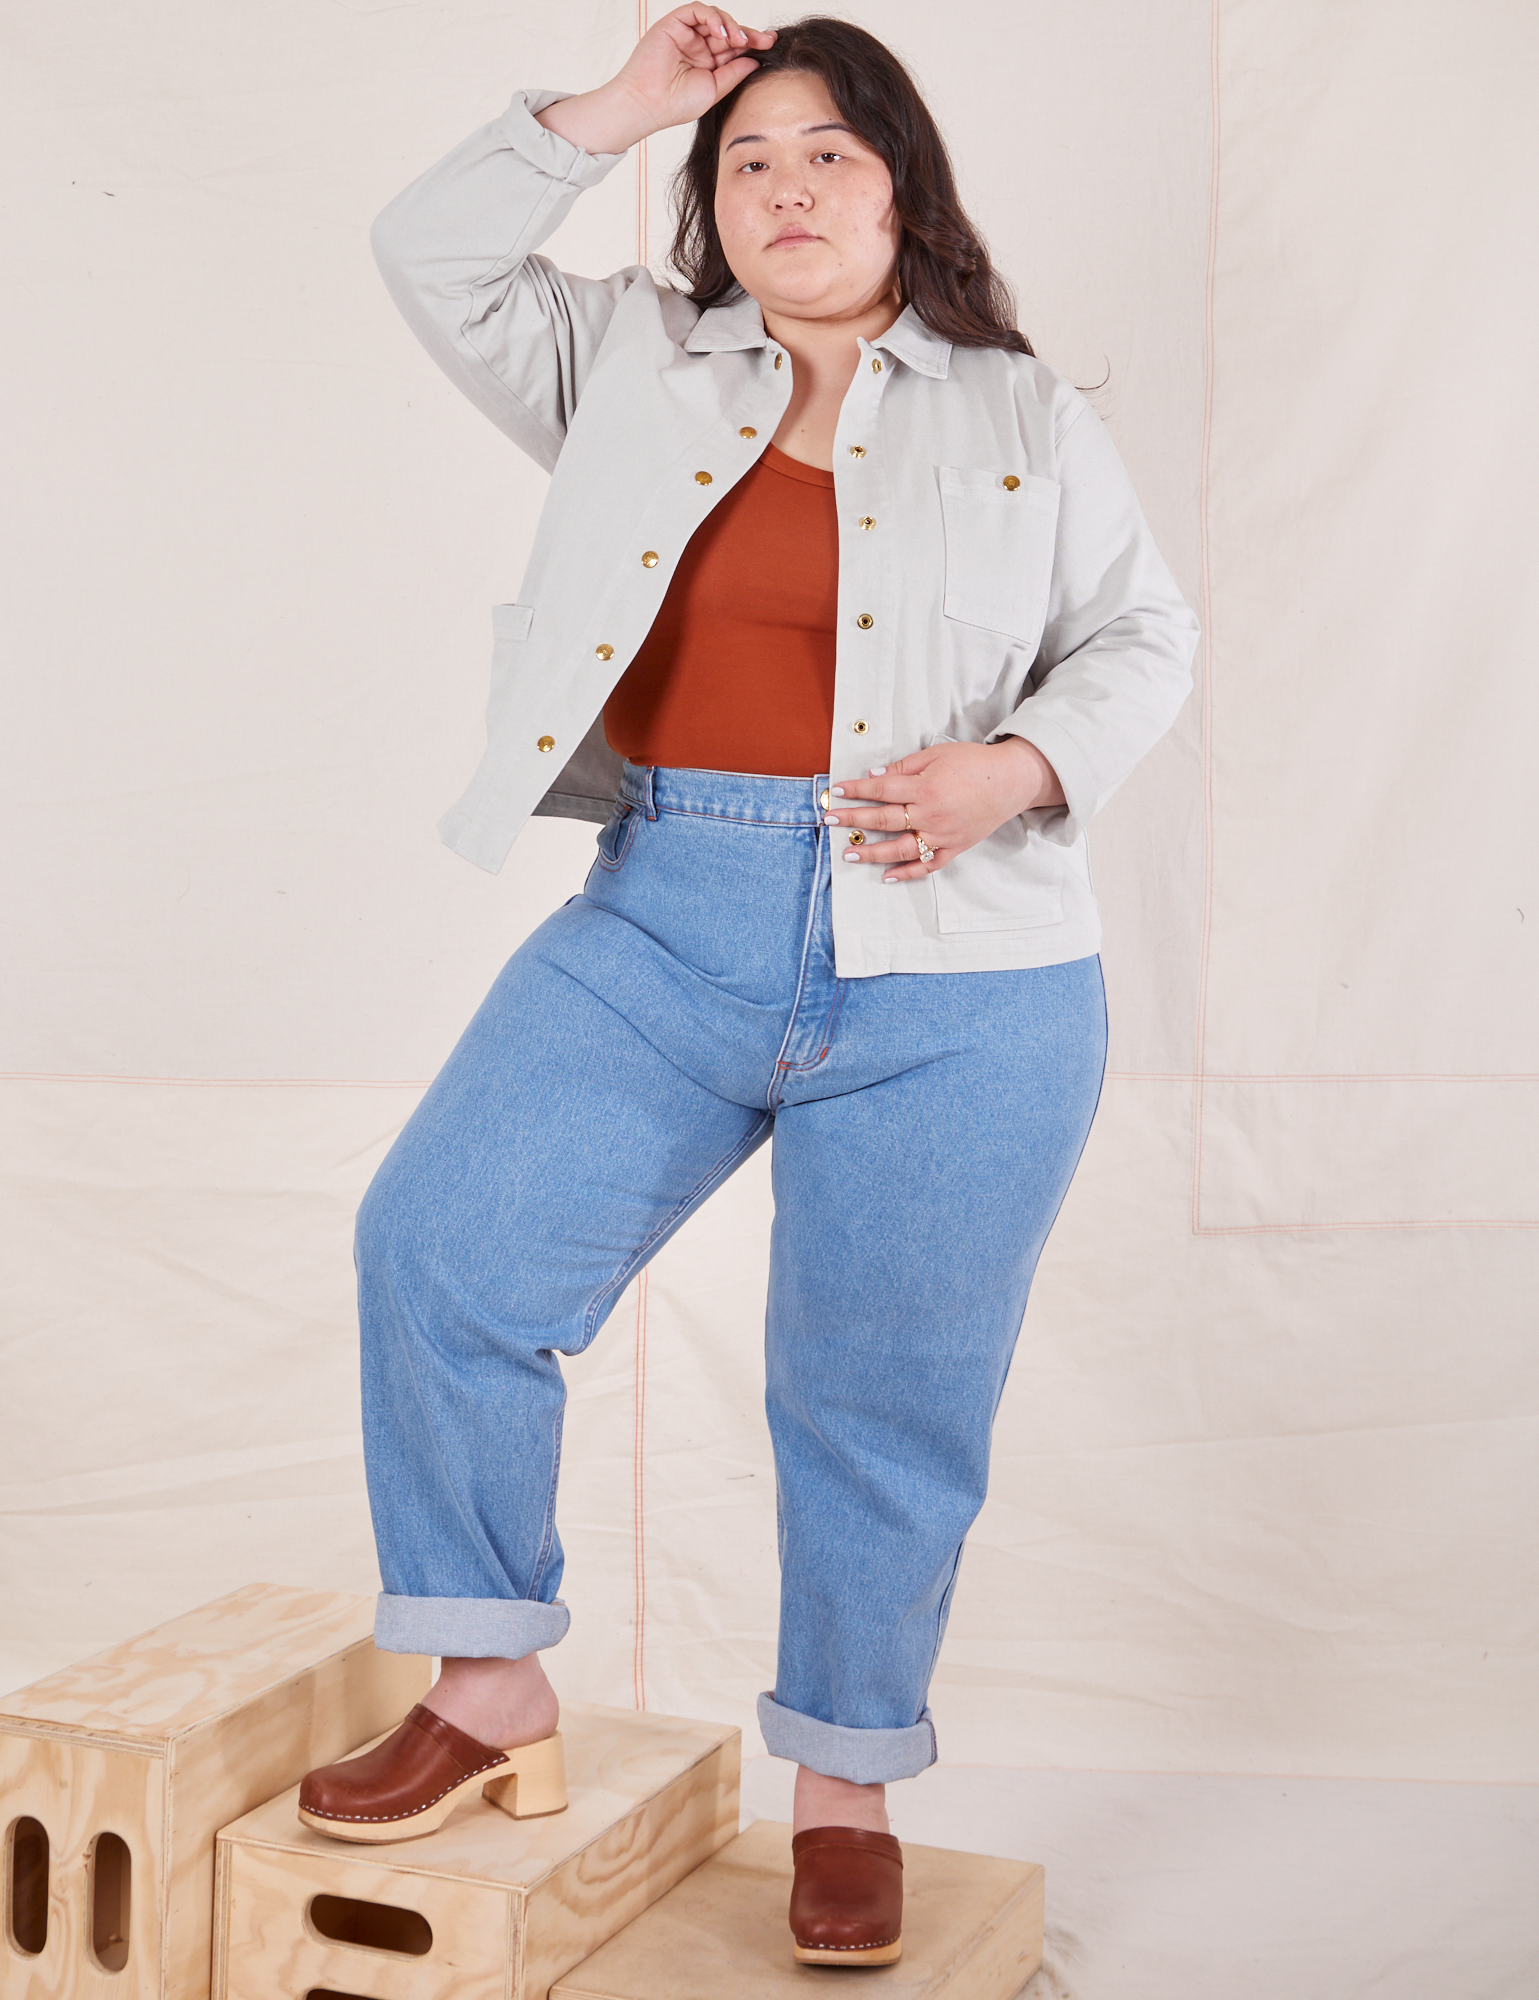 Ashley is 5&#39;7&quot; and wearing 1XL Denim Work Jacket in Dishwater White paired with light wash Frontier Jeans